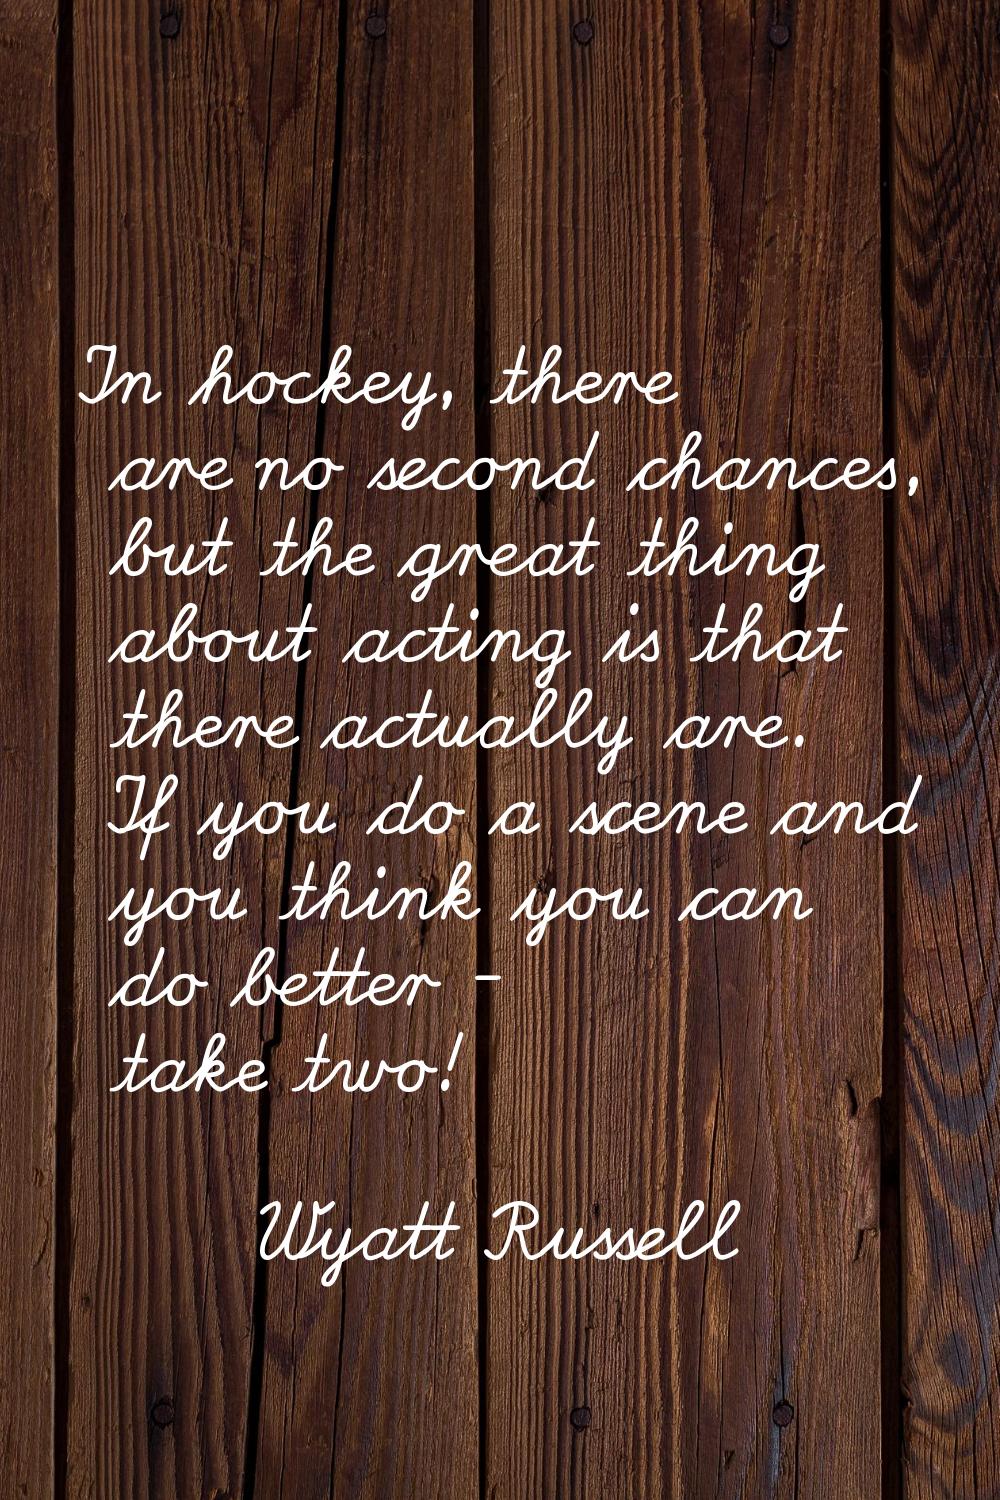 In hockey, there are no second chances, but the great thing about acting is that there actually are